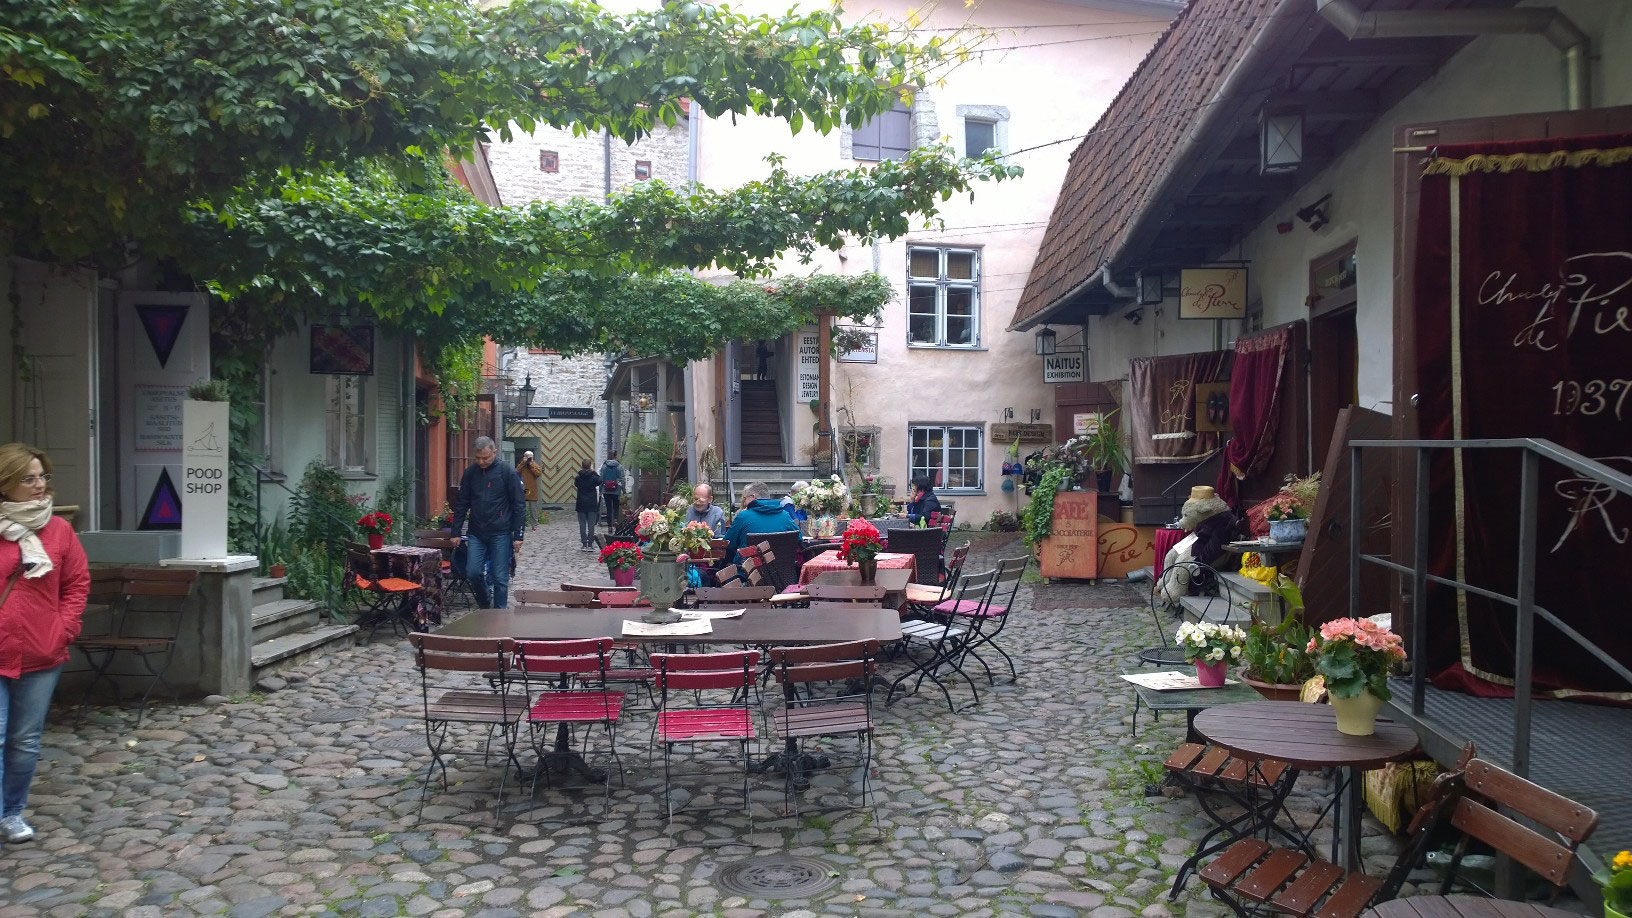 Street cafe in Estonia                                         Photo by Morf Morford